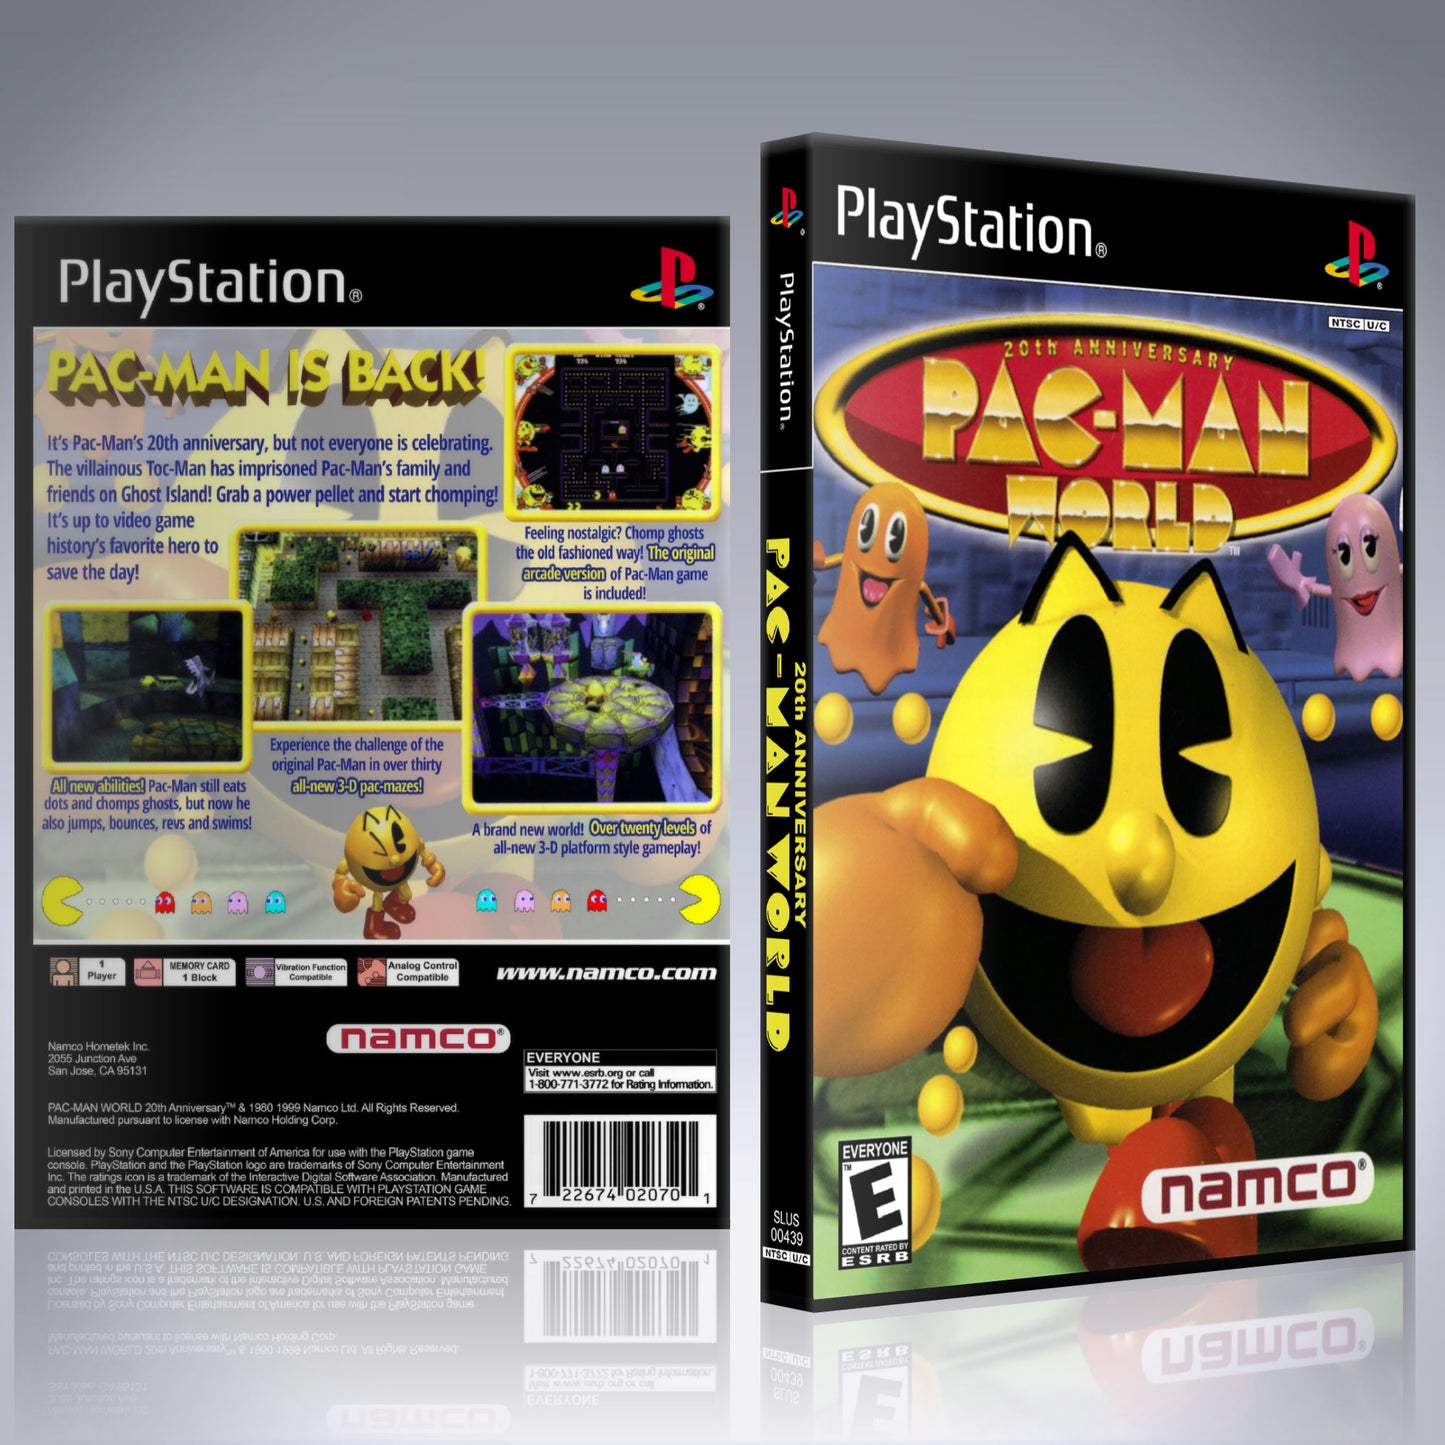 PS1 Case - NO GAME - Pac-Man World - 20th Anniversary